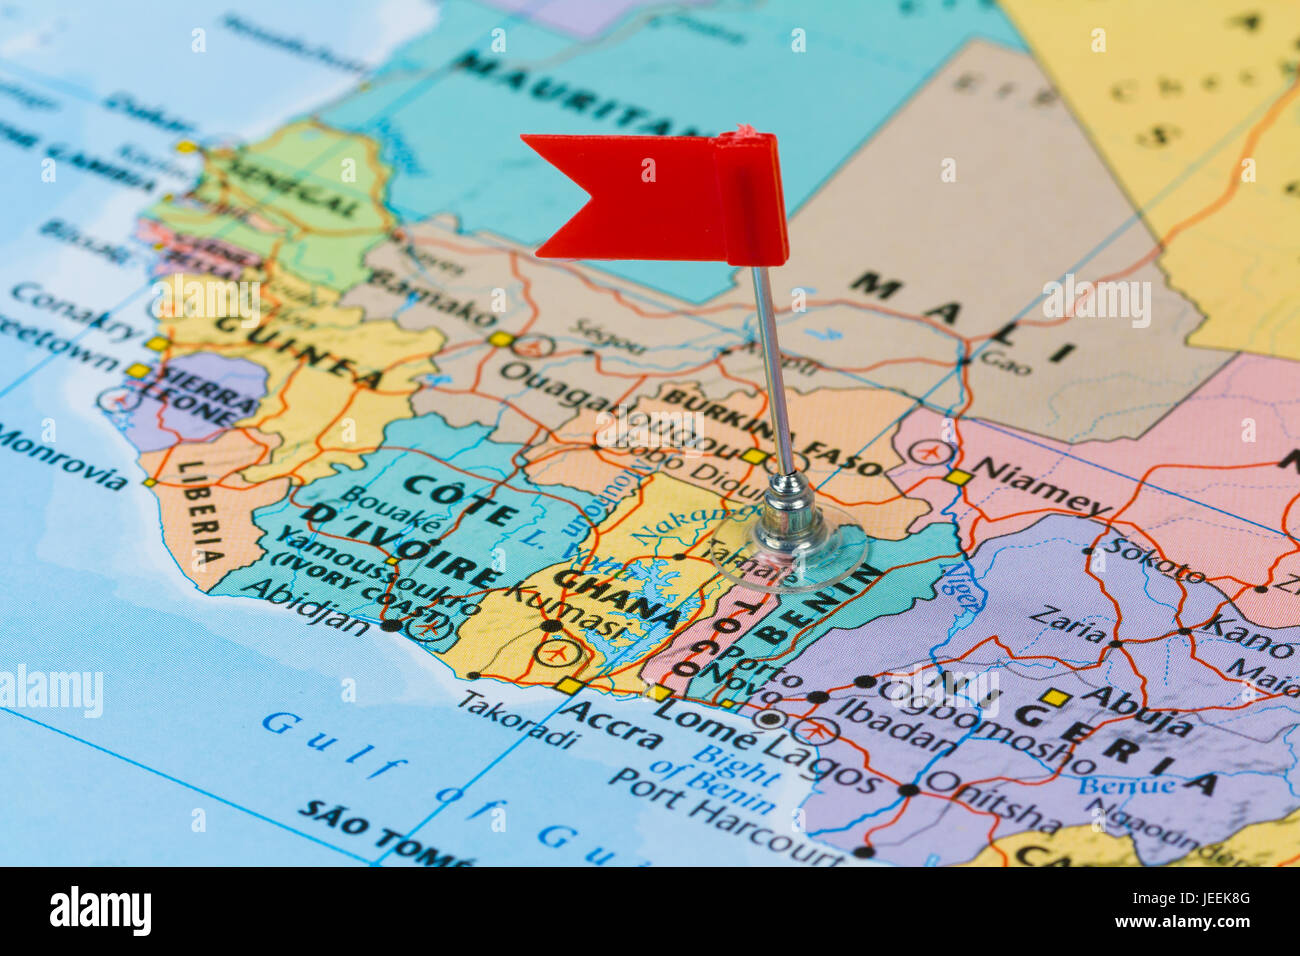 Photo of Togo marked by red flag in holder. Country on African continent. Stock Photo